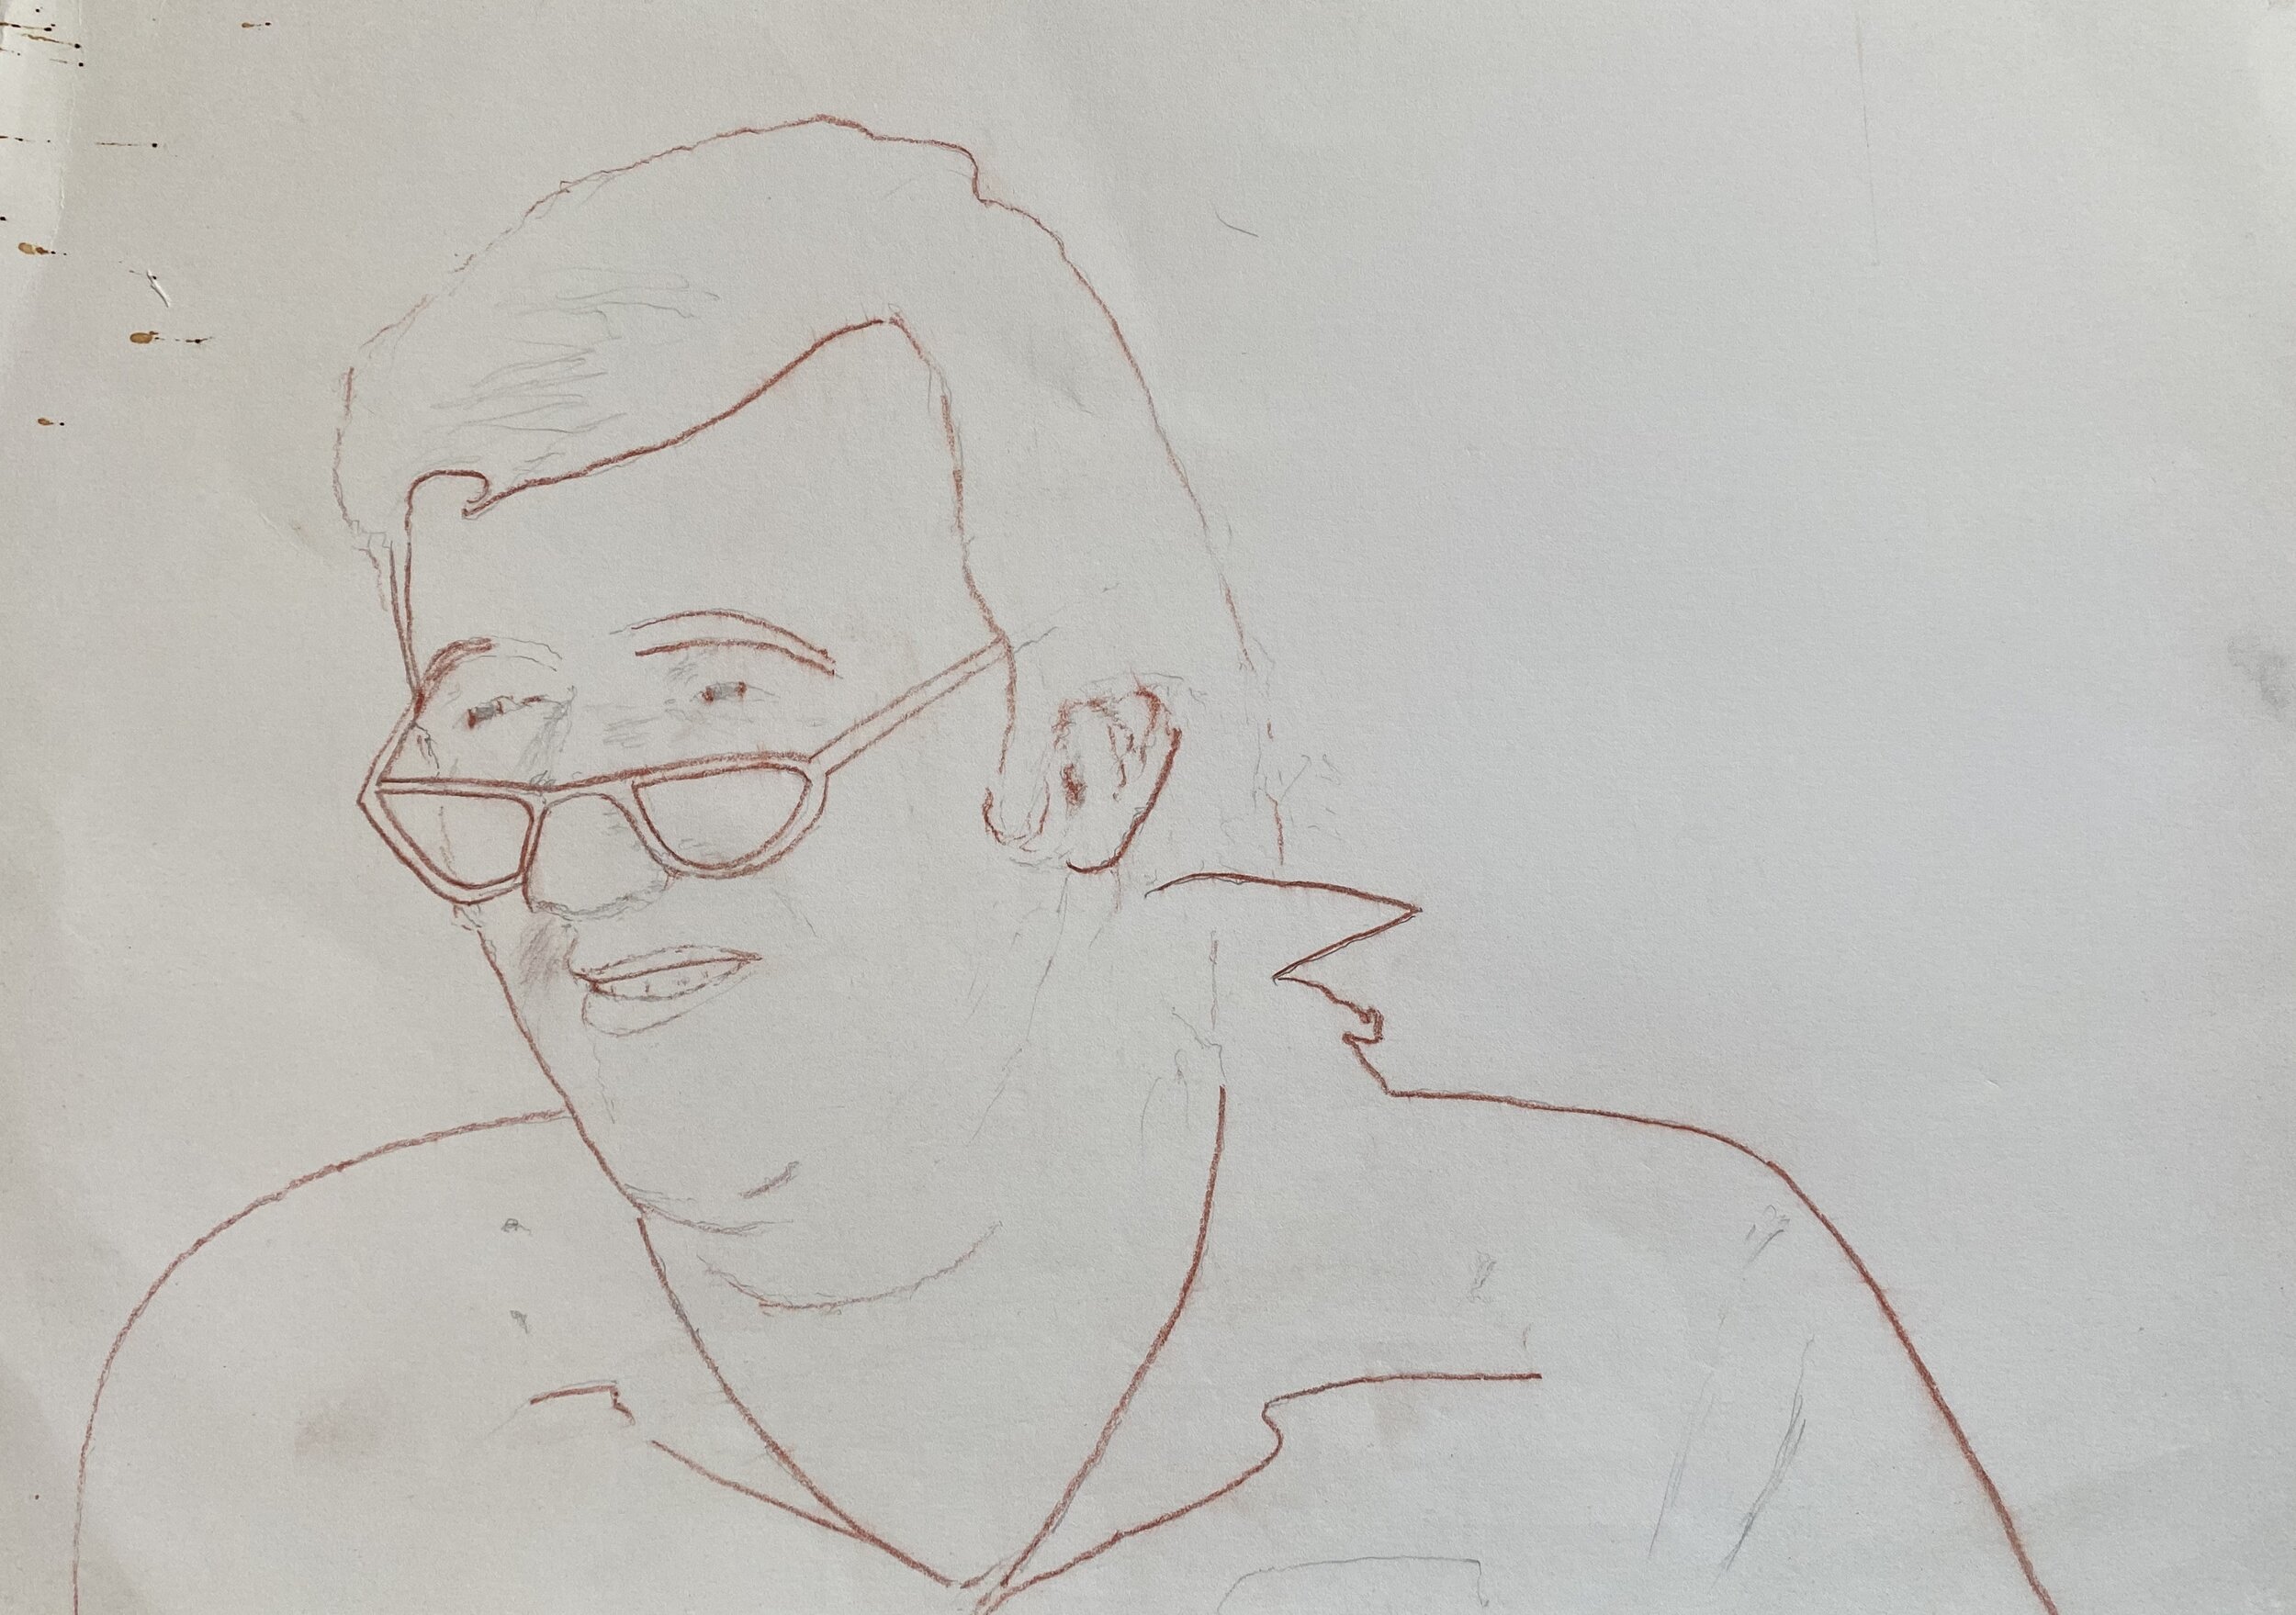   Description:  Man in glasses (unfinished)   Medium:  Pastel and pencil on paper   Dimensions:   H: 12 in W: 18 in 